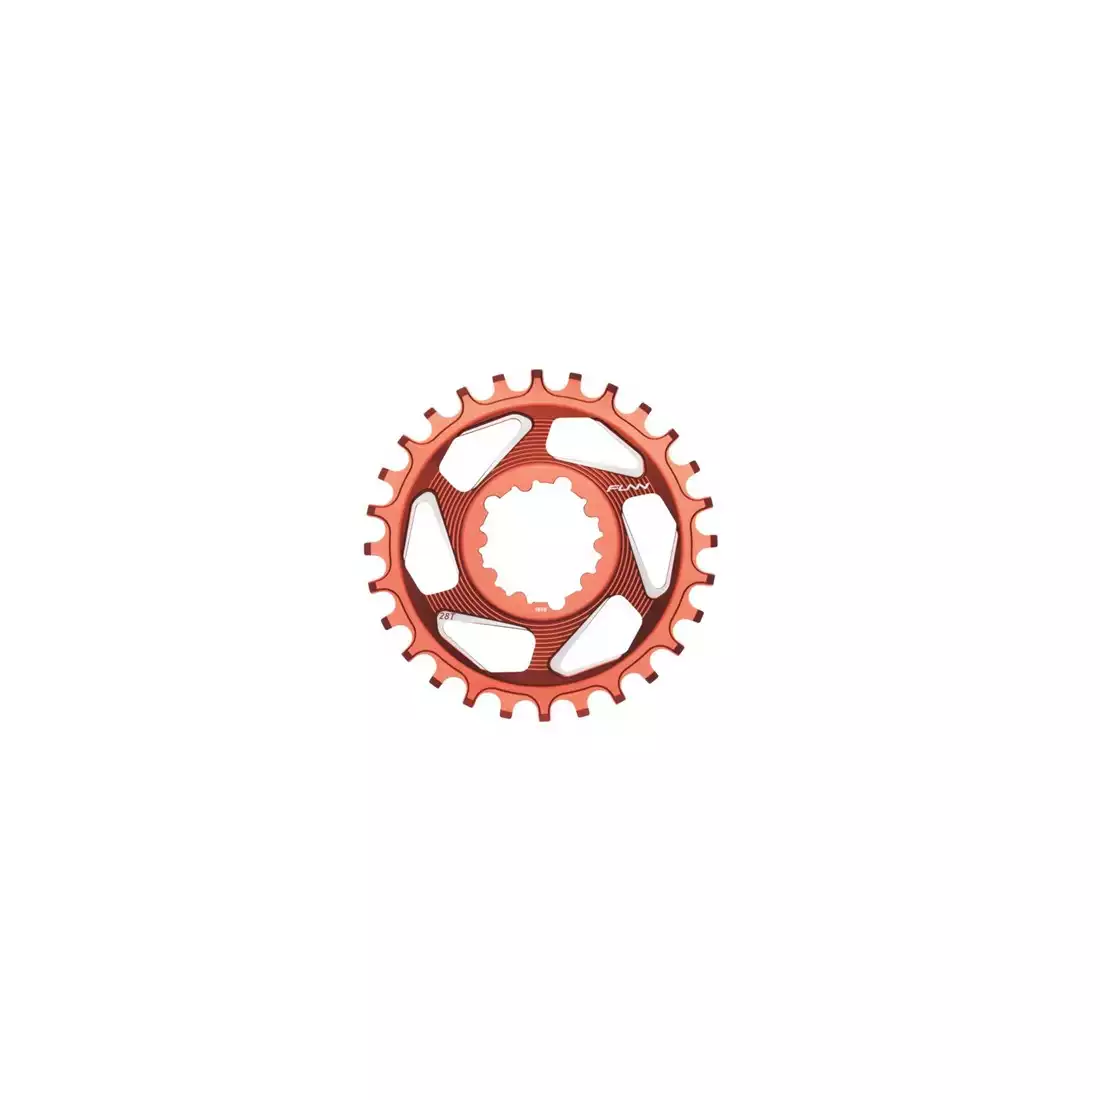 FUNN SOLO DX NARROW-WIDE BOOST 28T red sprocket for bicycle crank